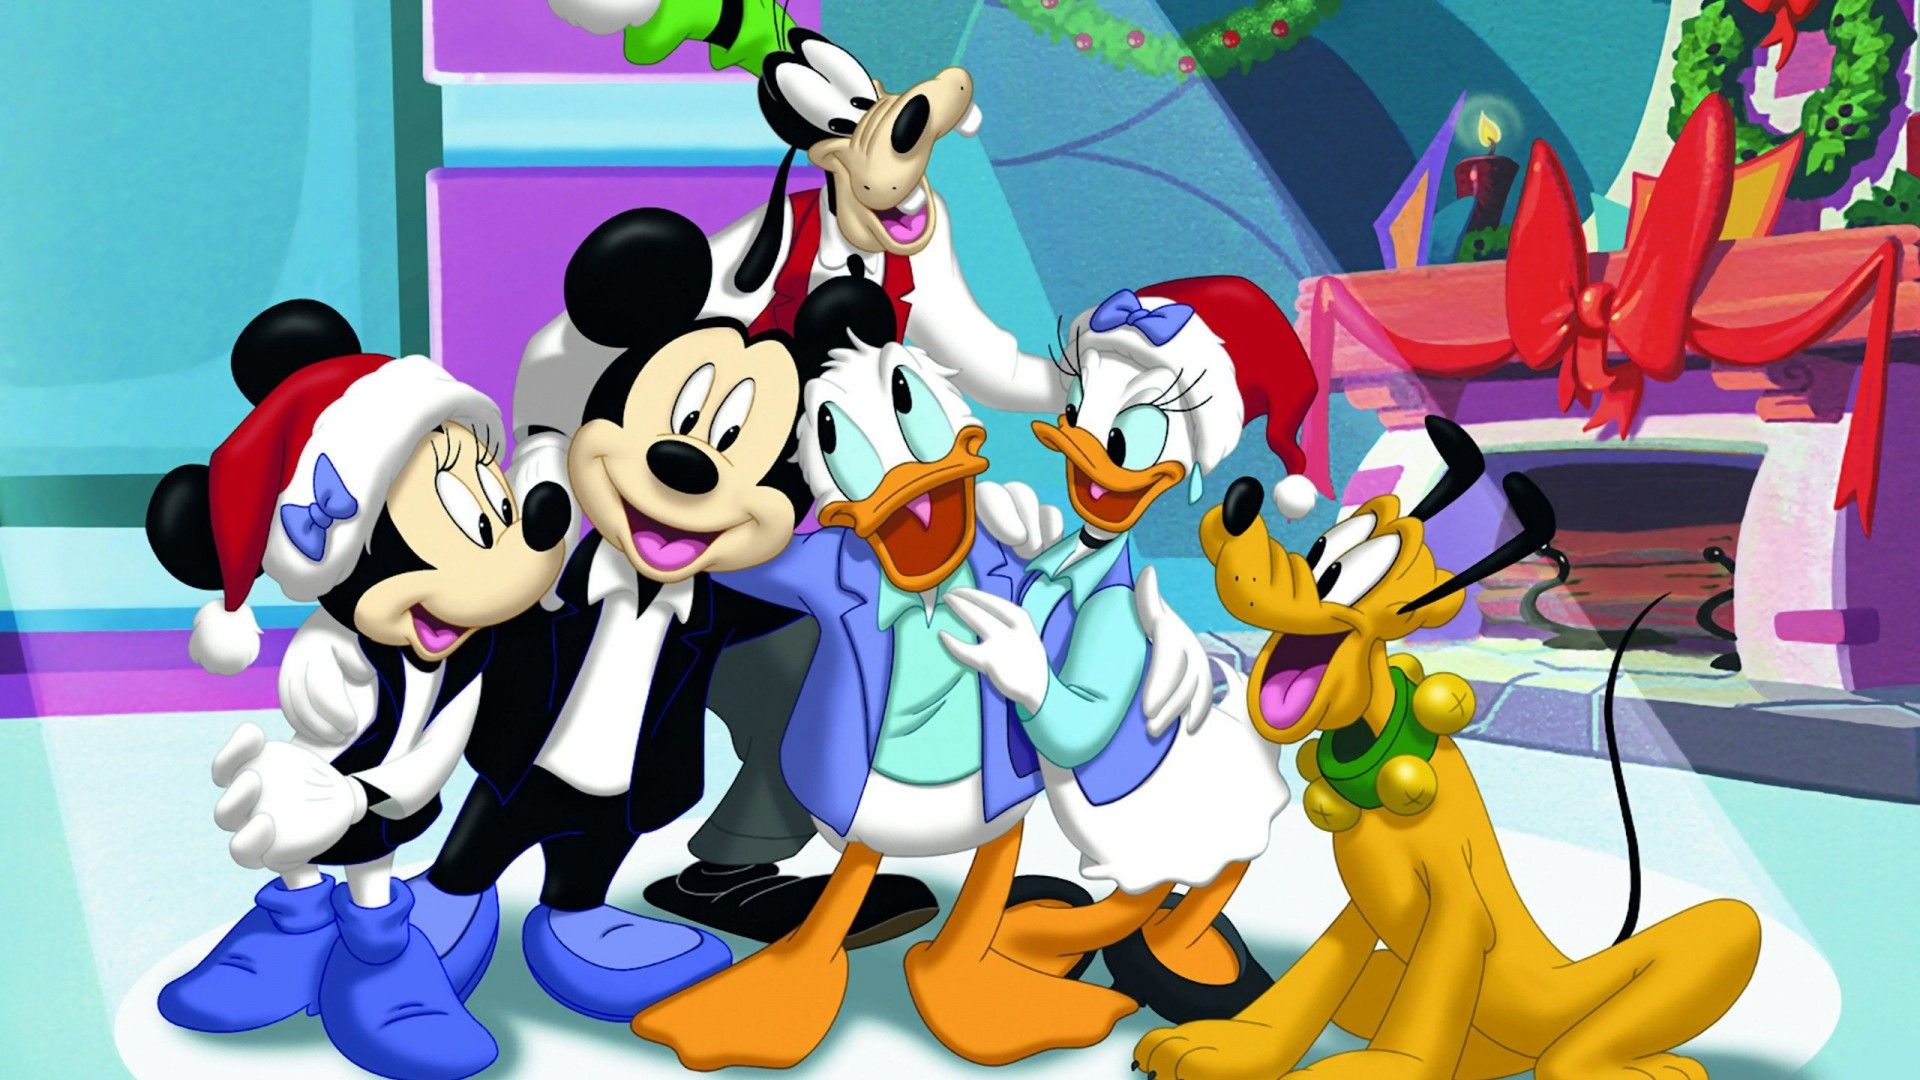 Mickey Mouse Christmas Celebration With Friends Wallpaper HD, Wallpaper13.com